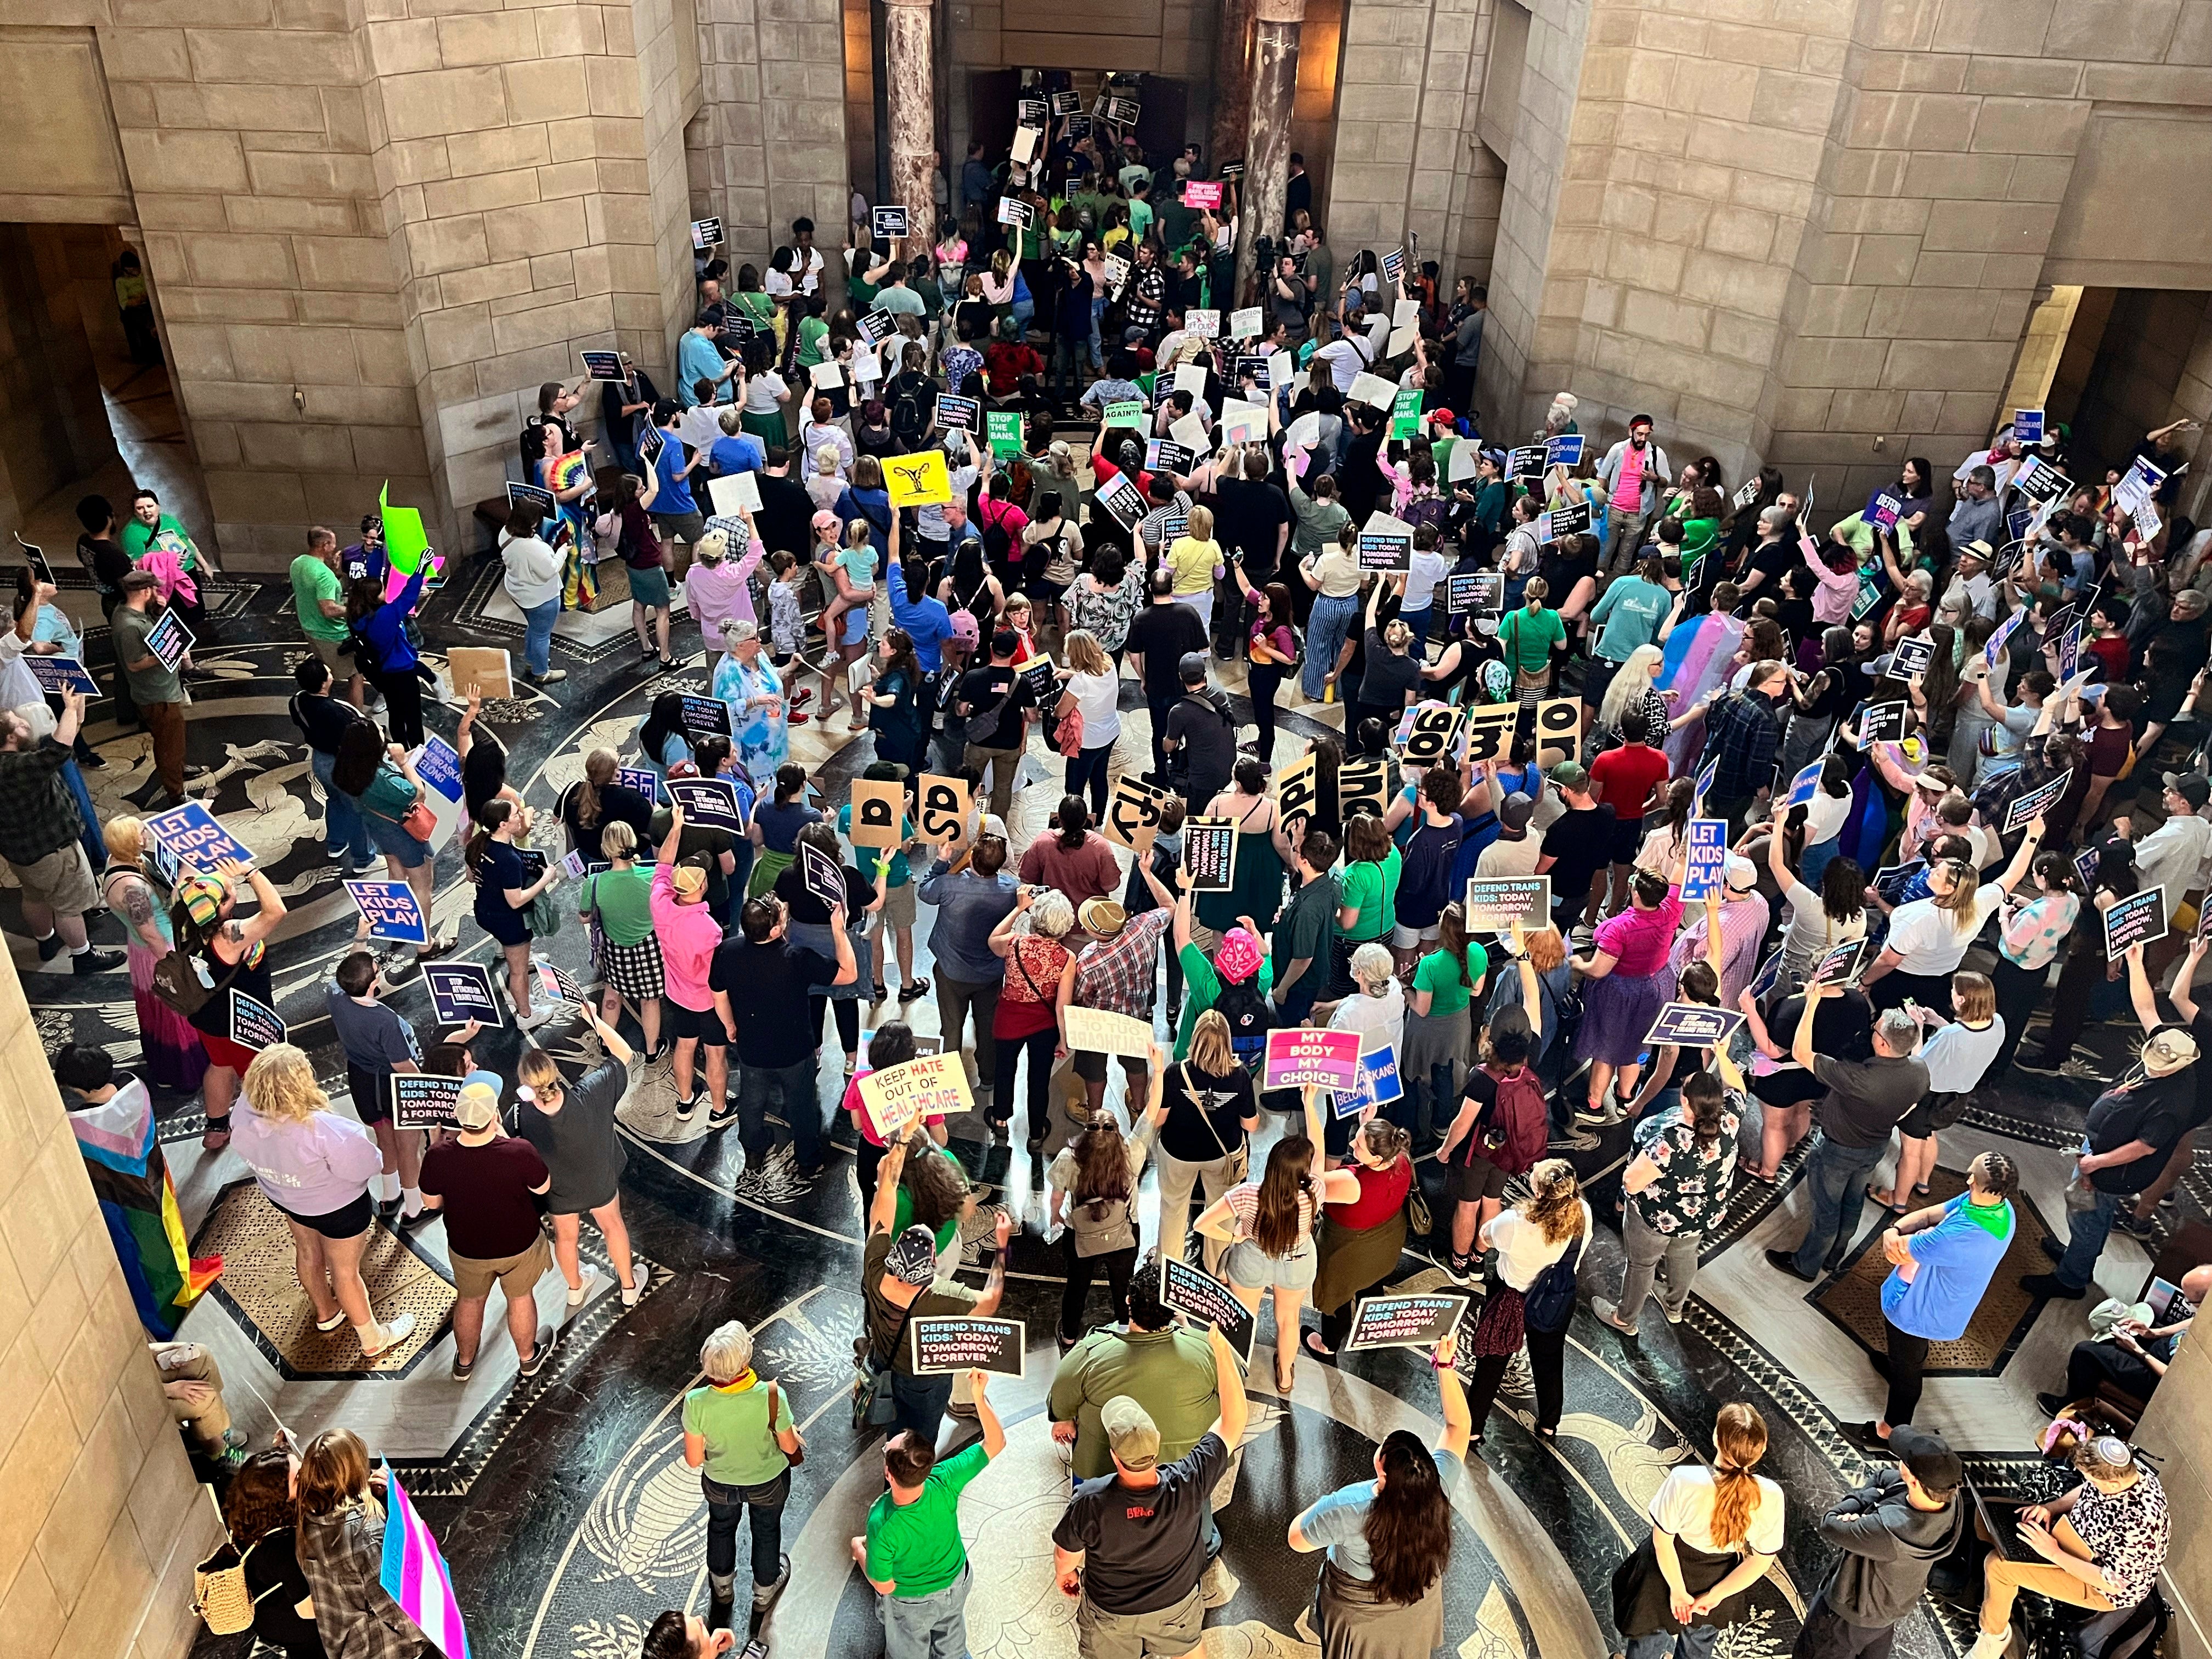 Protesters poured into the state capitol in Lincoln to oppose legislation targeting abortion access and transgender healthcare